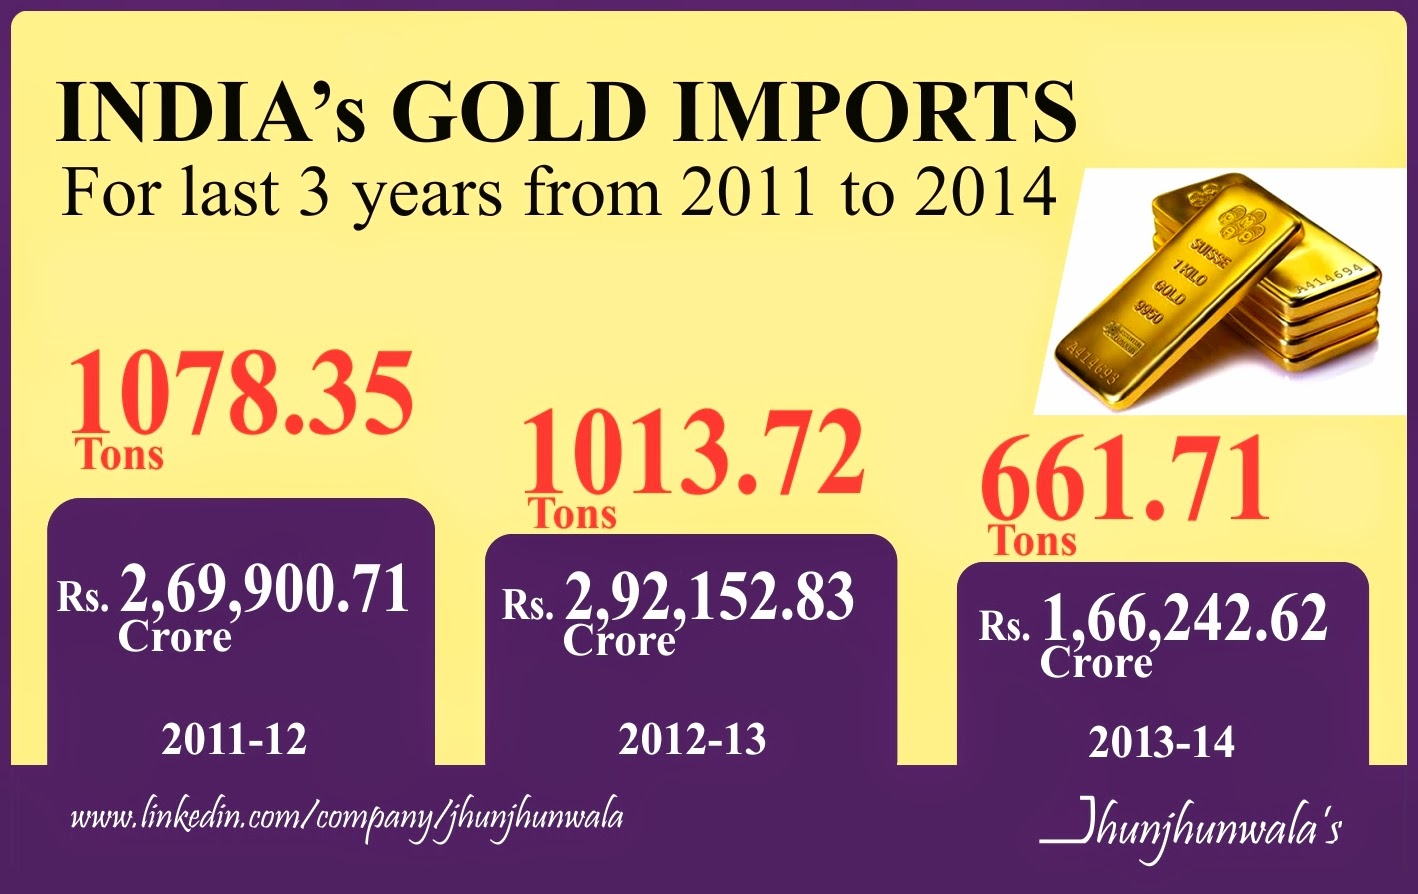 India Gold Imports for last 3 years from 2011 - 2014